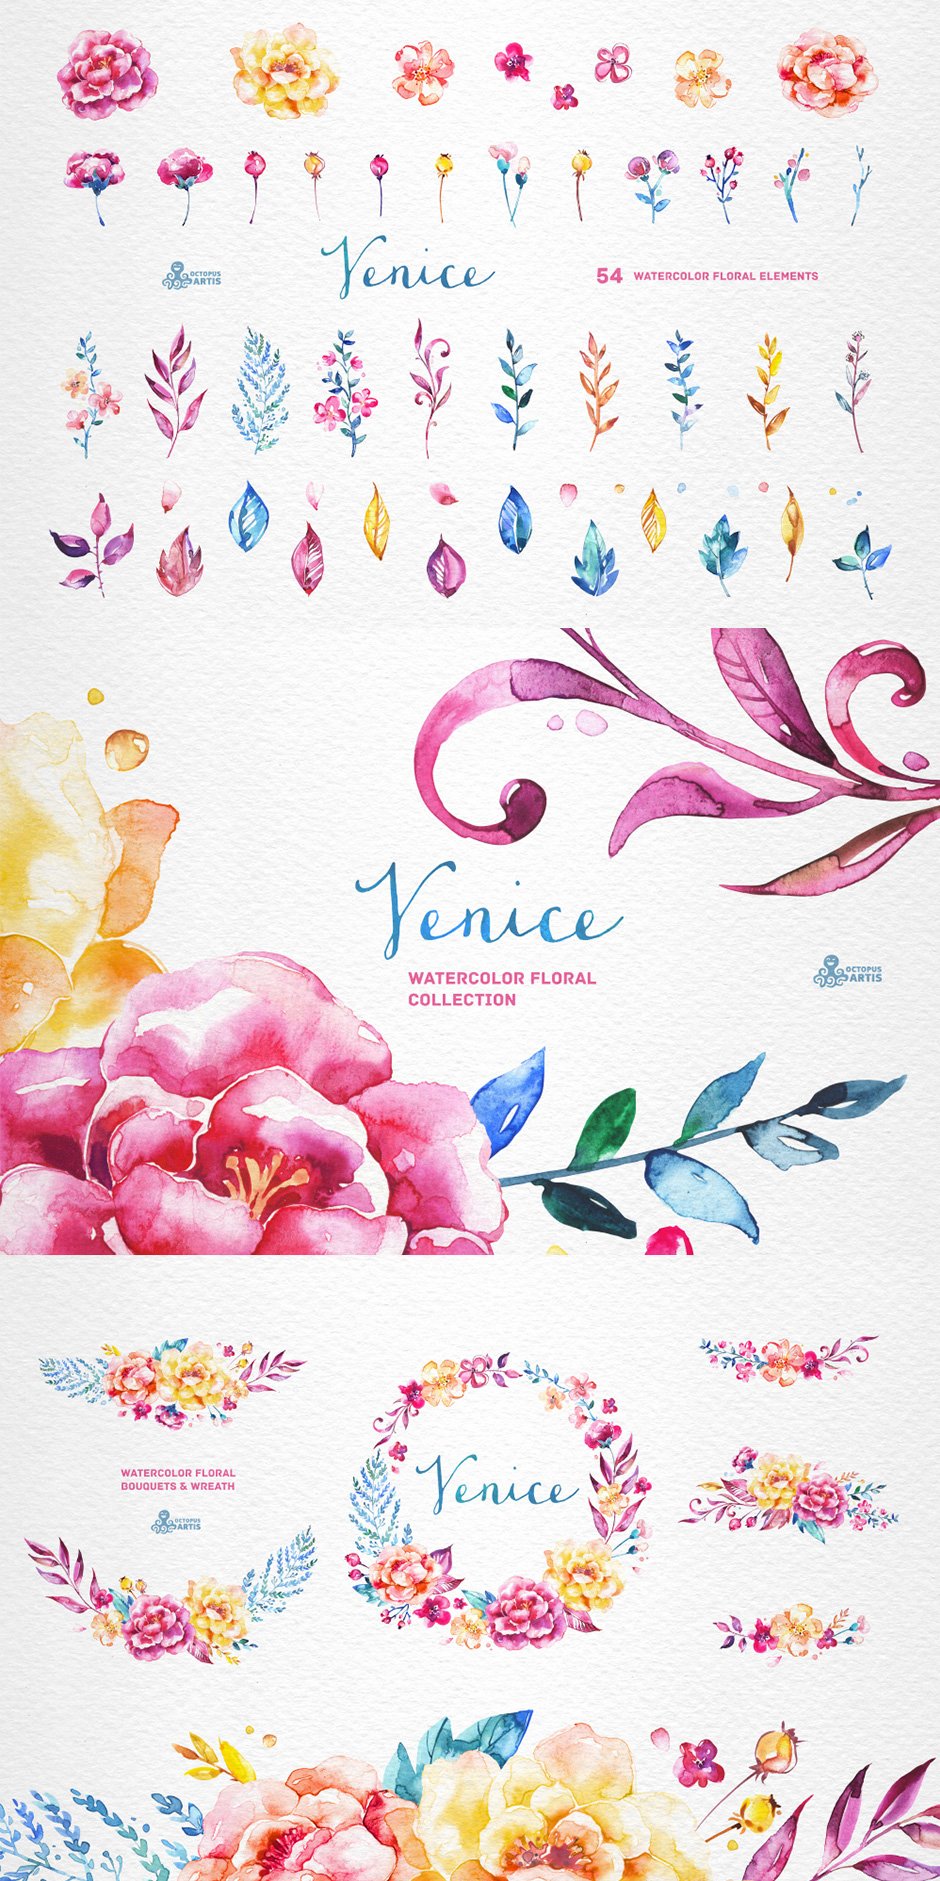 Venice Watercolor Floral Collection